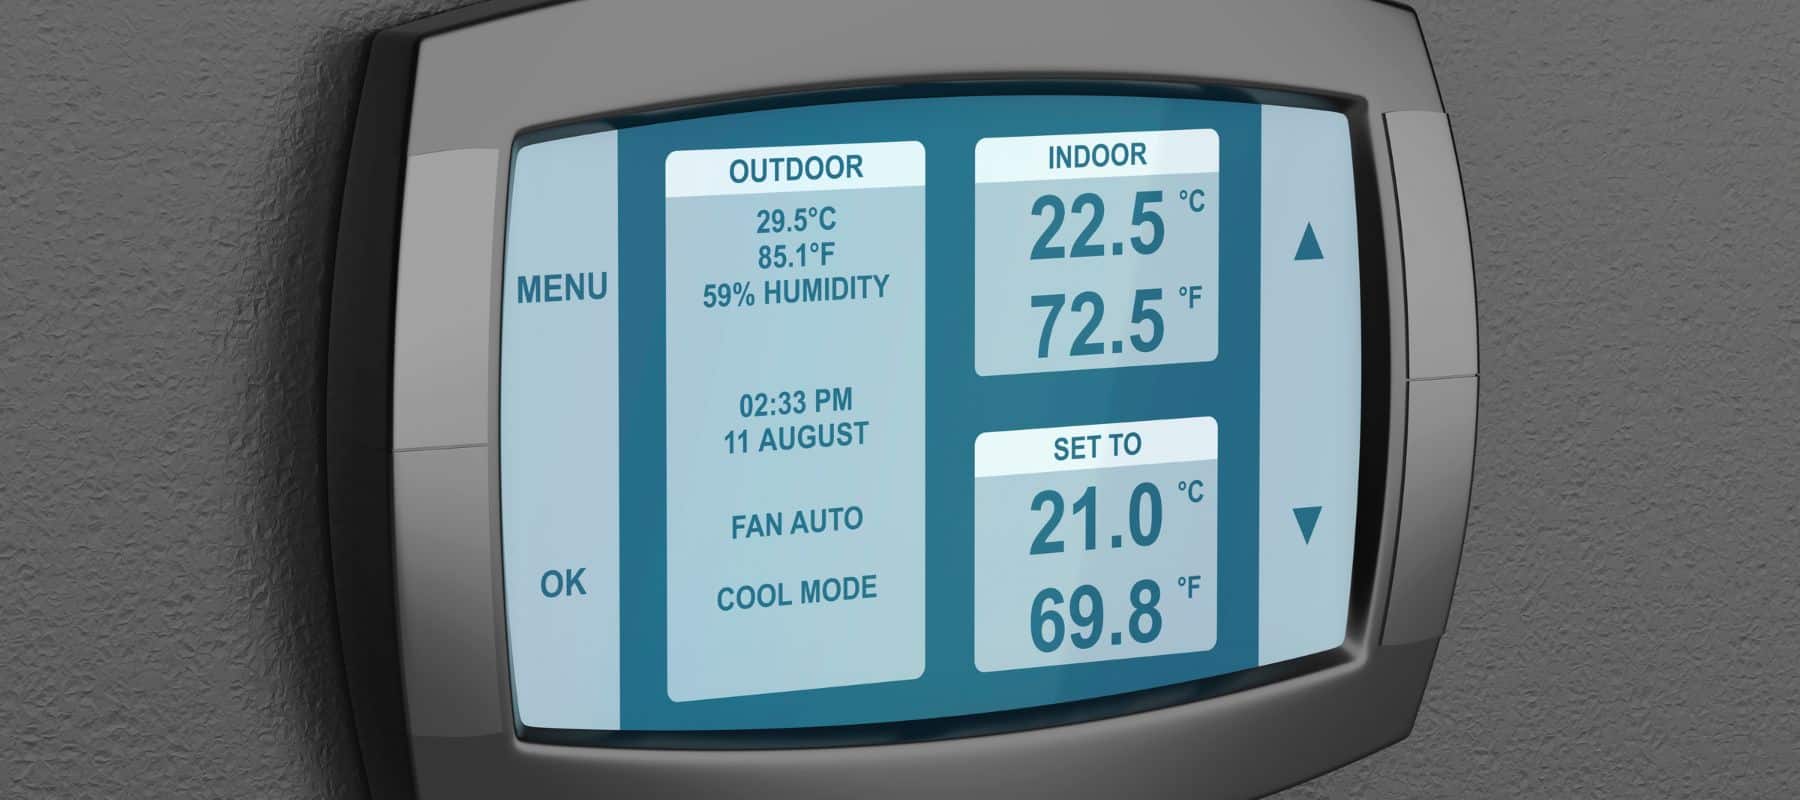 smart thermostat close up. Thermostat displaying the various temperatures